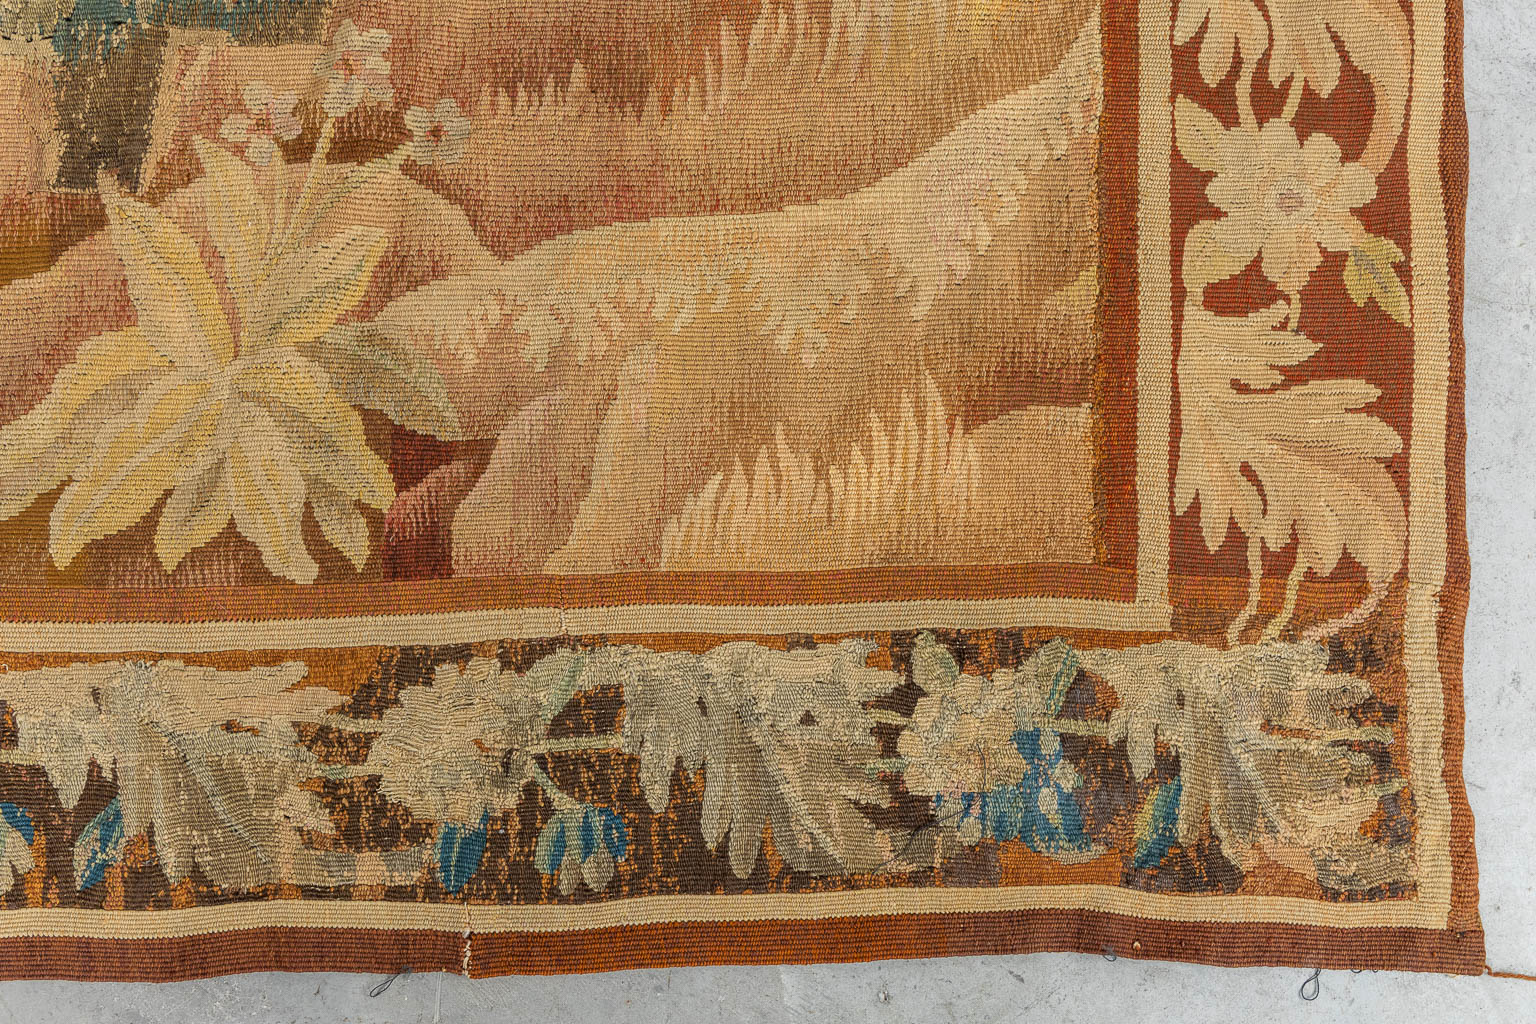 An antique Tapissery, decorated with fauna and flora. 17th C. (L:400 x W:260 cm)